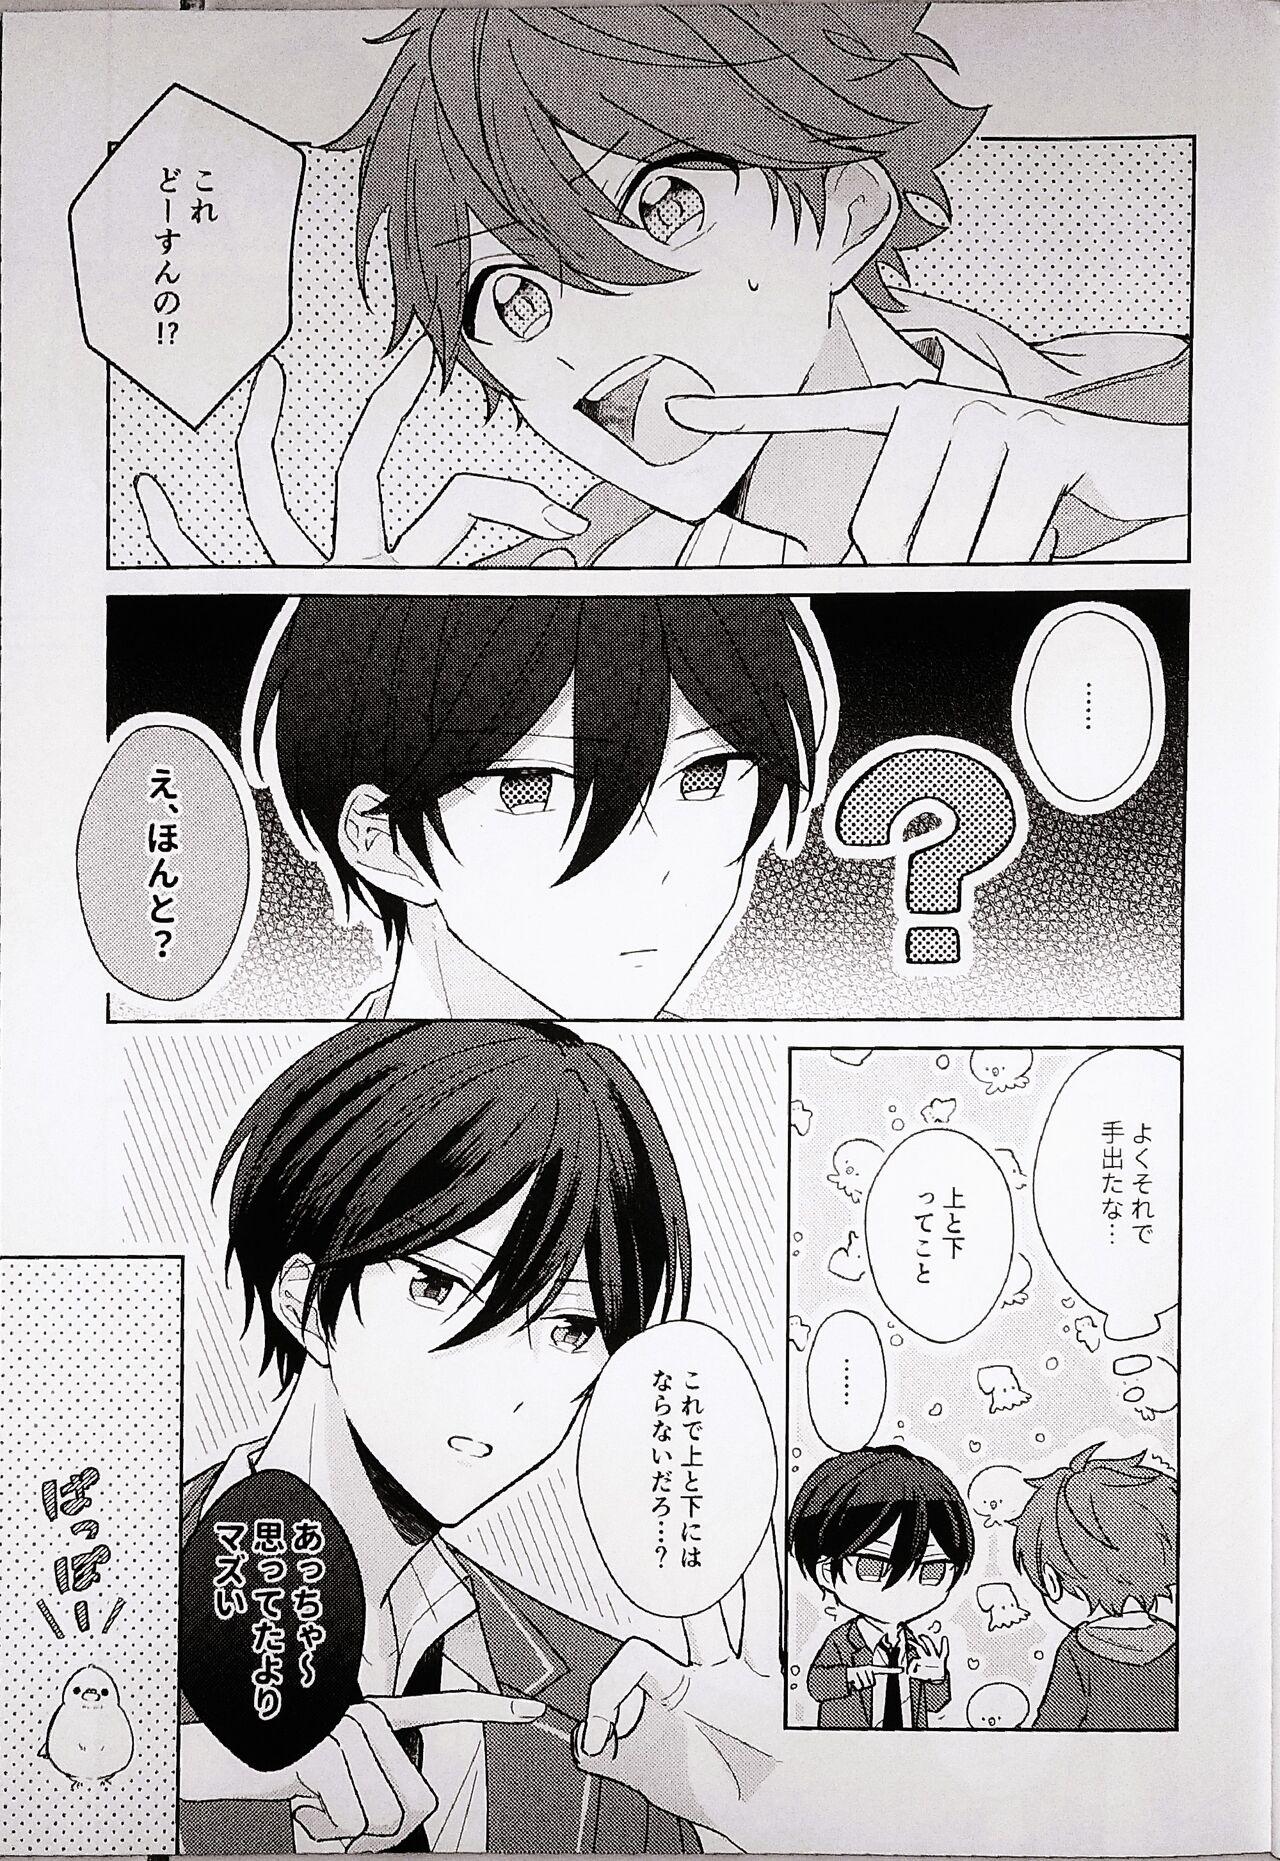 Dykes Kyou wa Koko made! - That's All For Today - Ensemble stars Flashing - Page 11